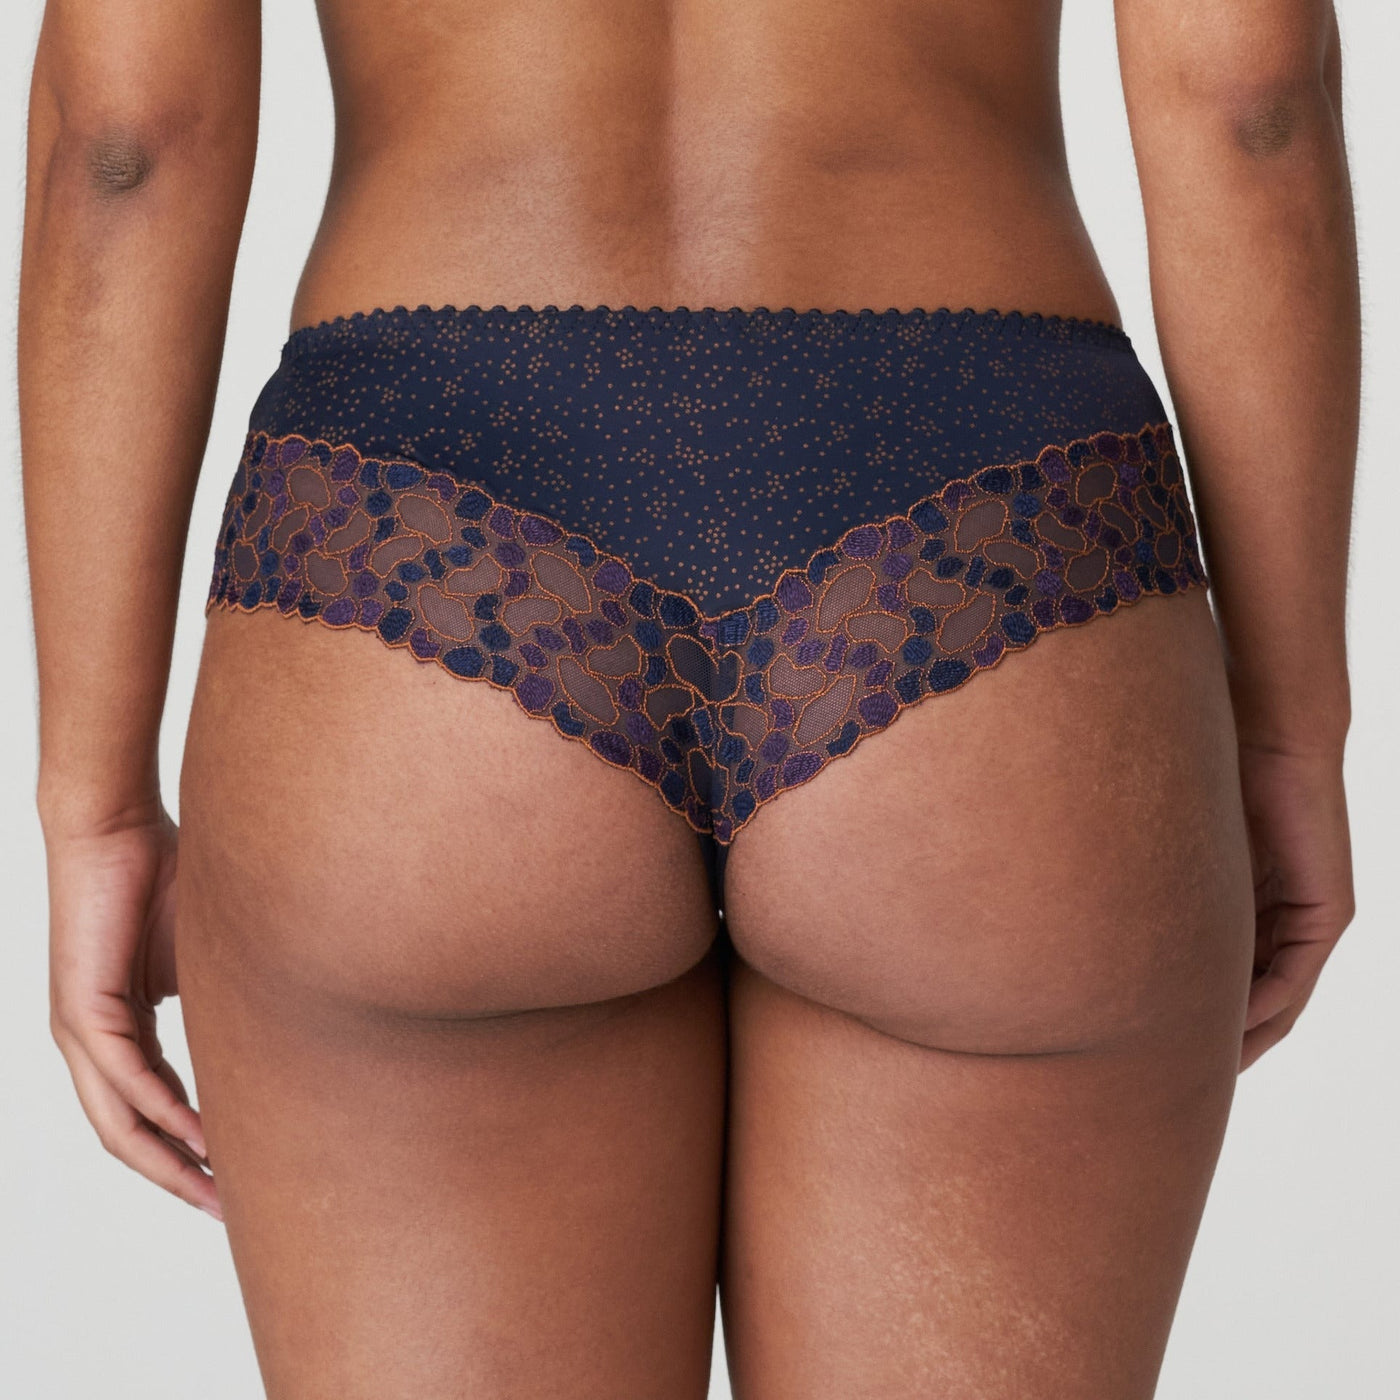 Prima Donna Hyde Park Luxury Thong in Velvet Blue 0663201-Panties-Prima Donna-Velvet Blue-Small-Anna Bella Fine Lingerie, Reveal Your Most Gorgeous Self!